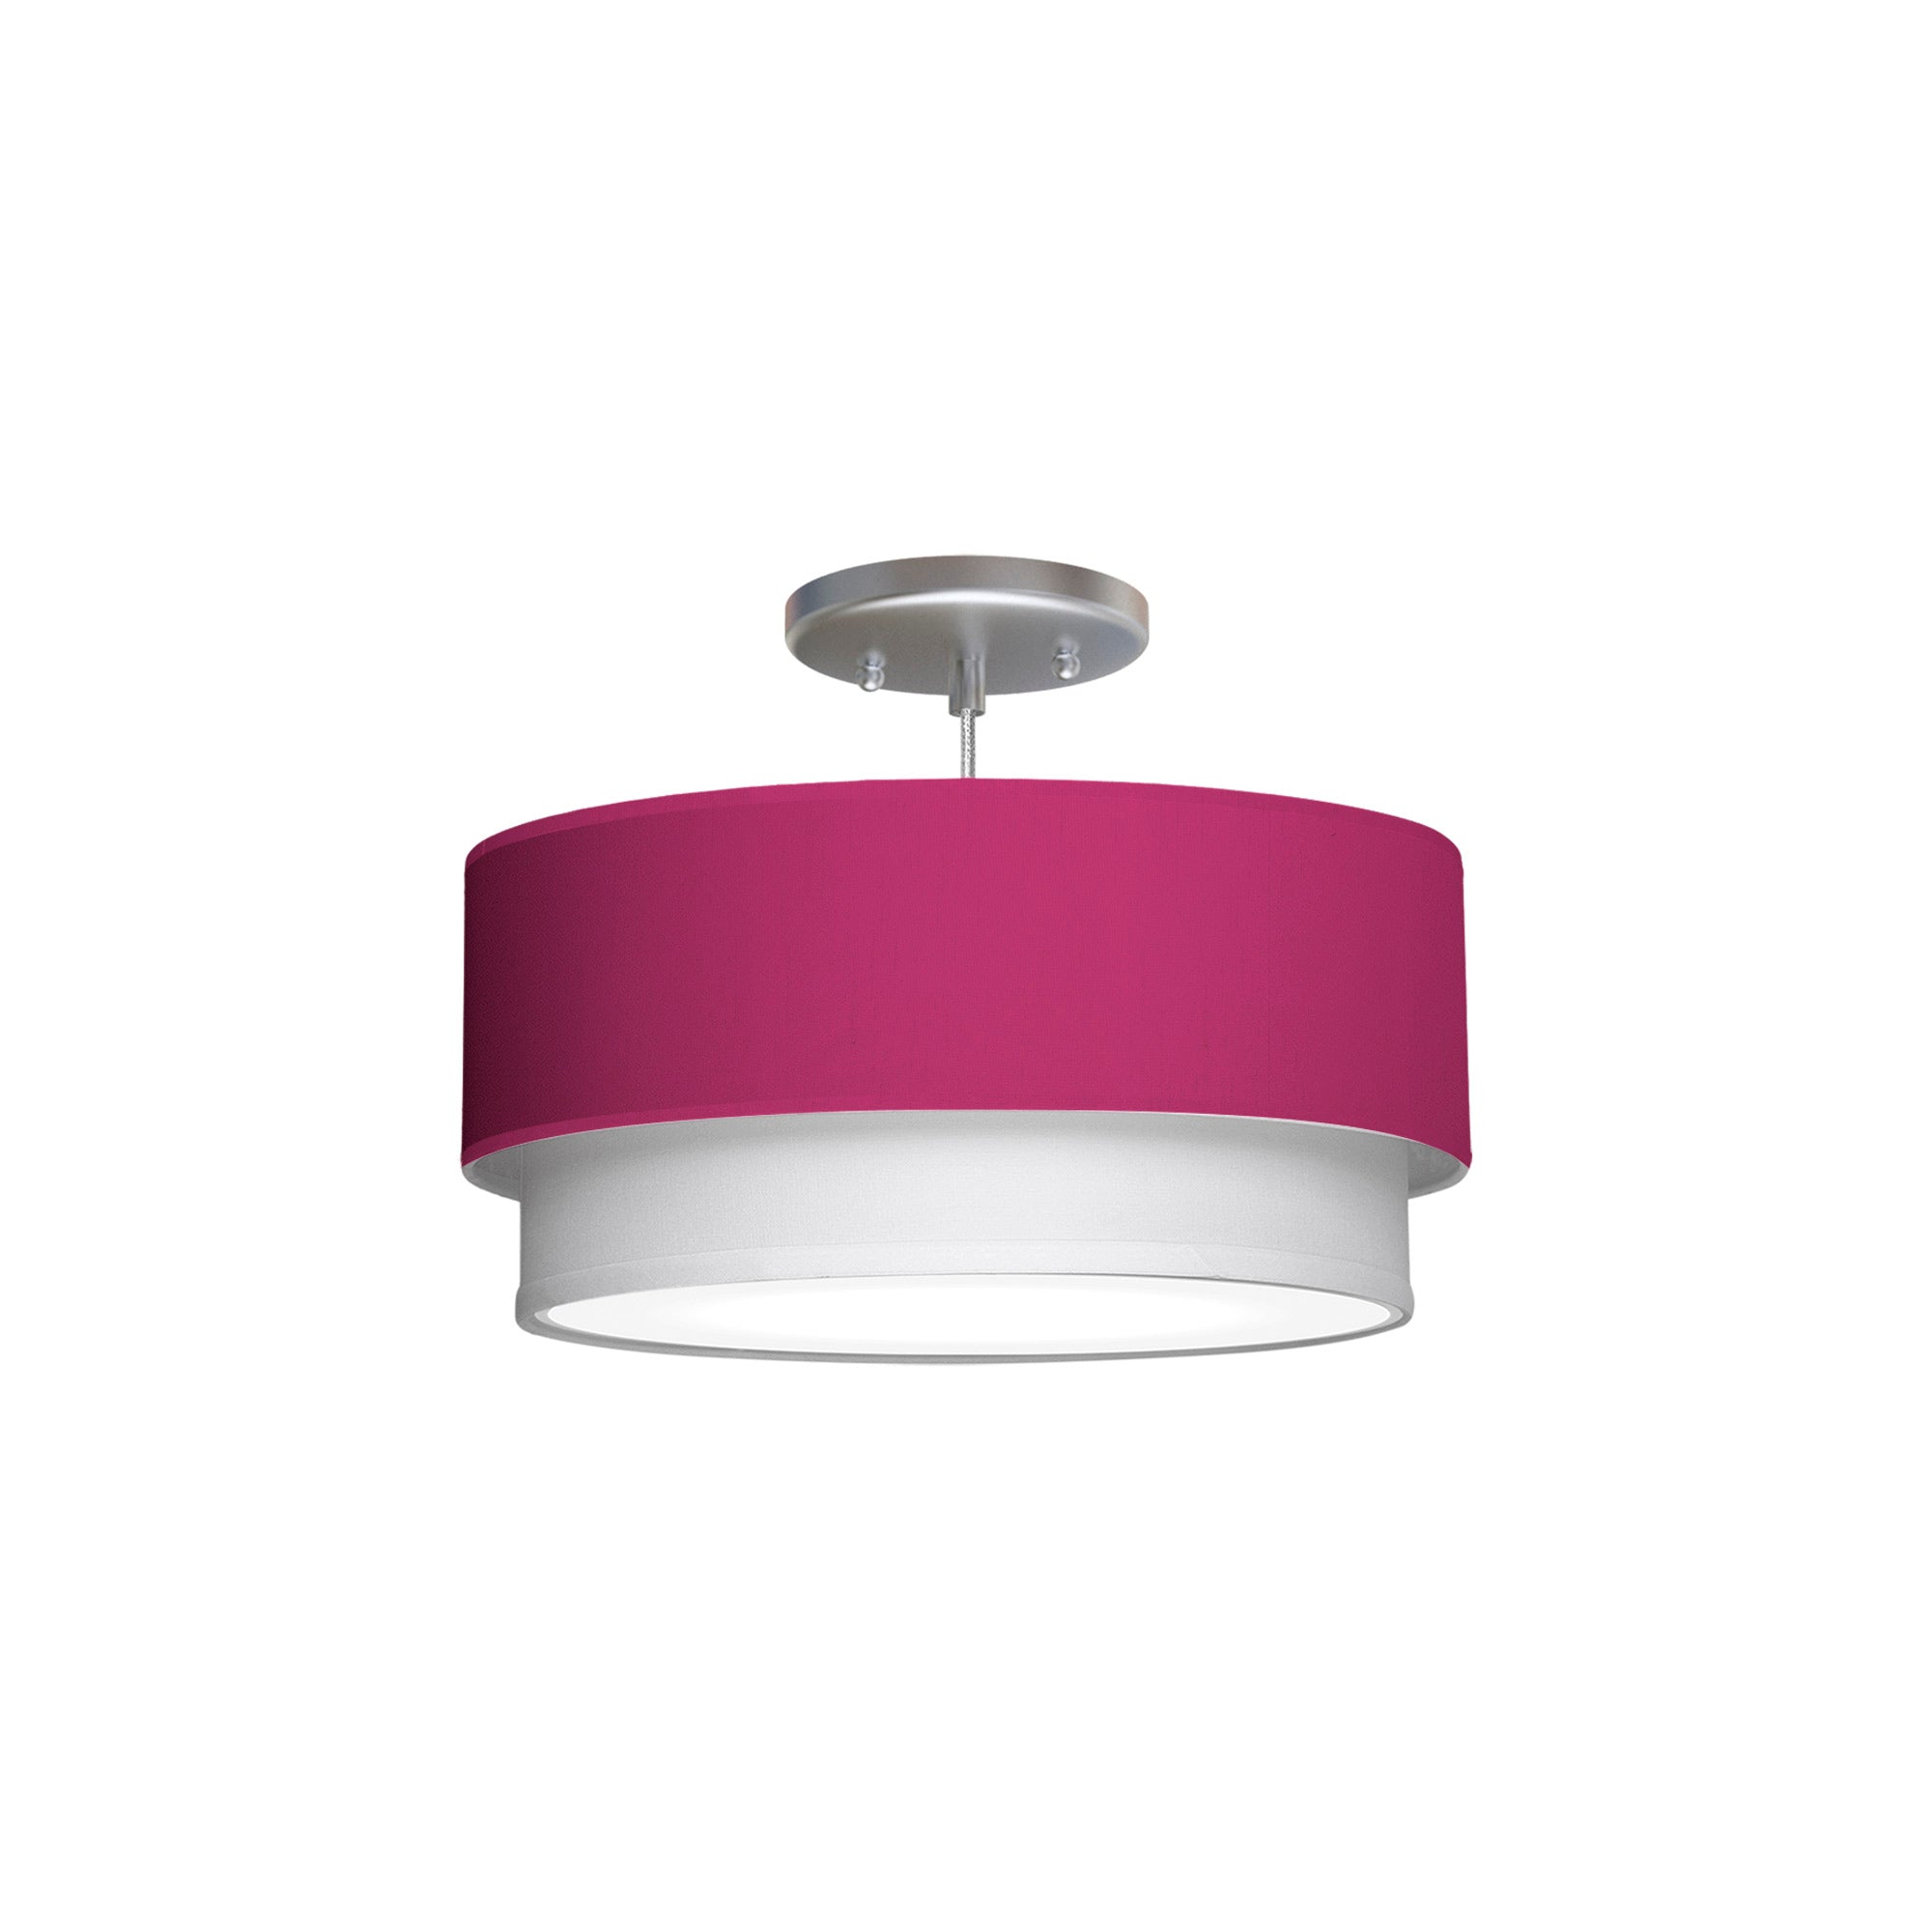 The Lenny Hanging Lamp from Seascape Fixtures with a silk shade in berry color.